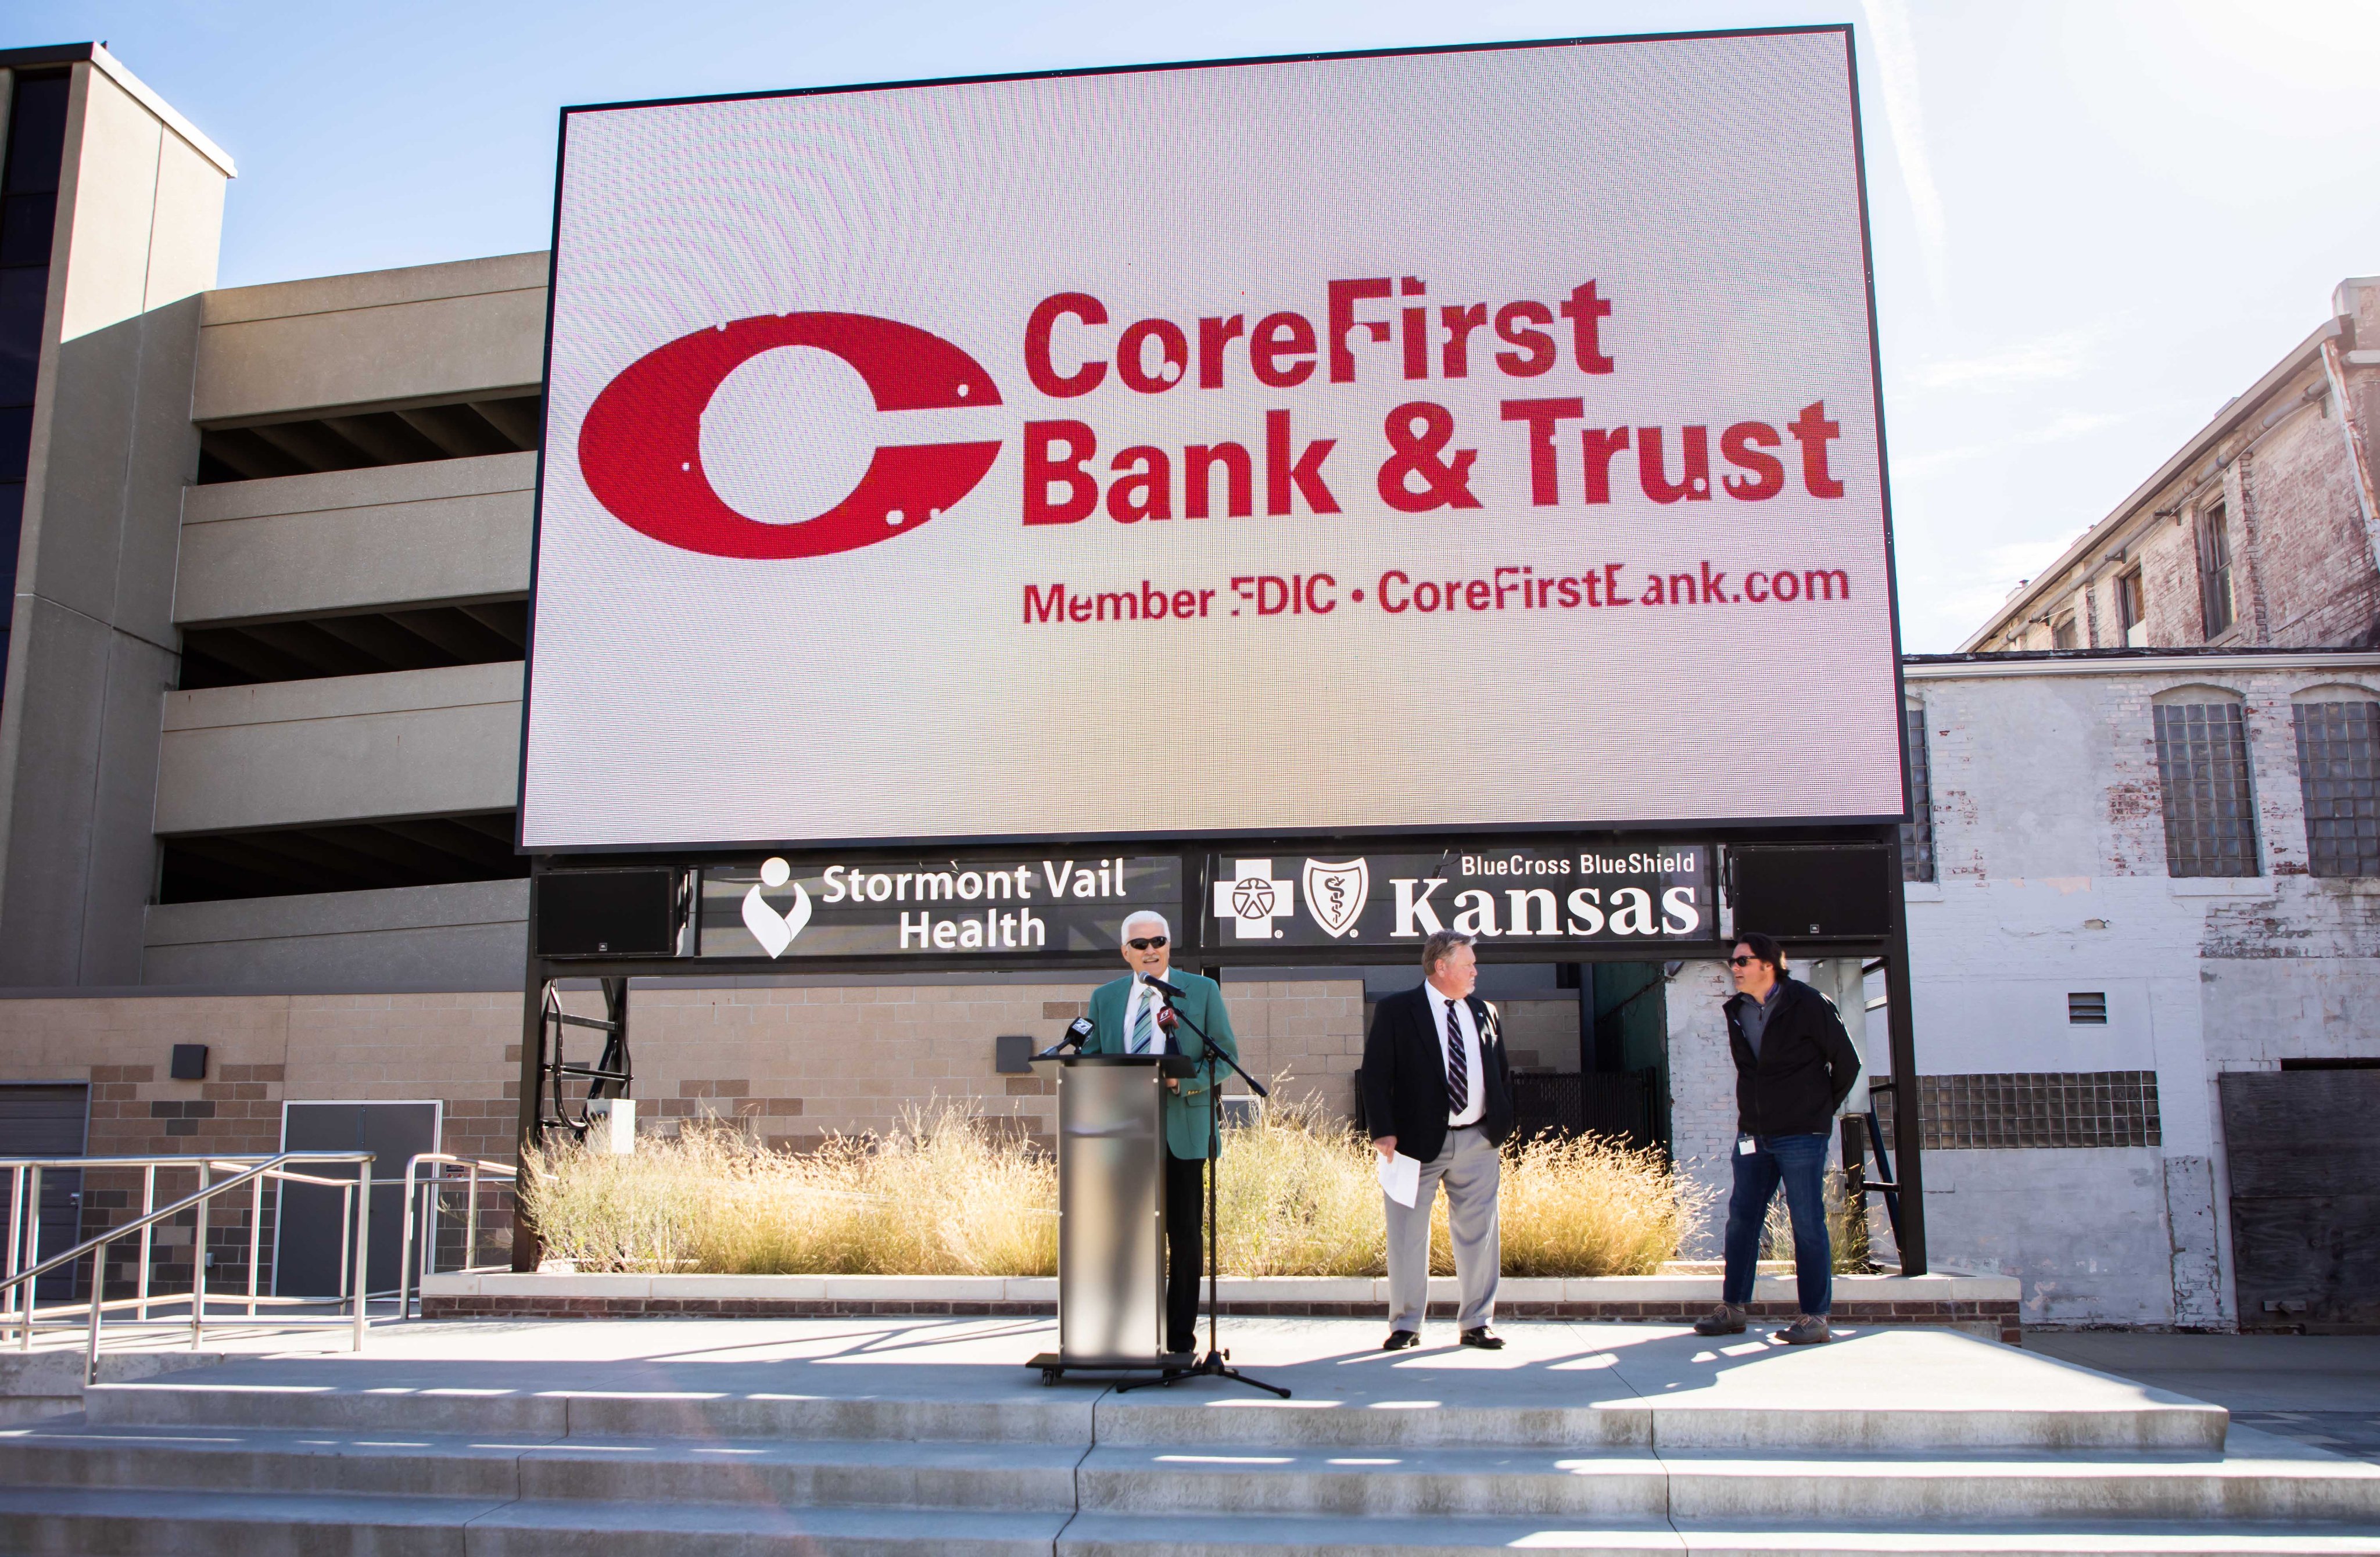 City of Topeka on X: This morning, @EvergyPlaza and @corefirst announced  the opening of the CoreFirst Ice Rink at Evergy Plaza! Construction will  begin later this month with an anticipated grand opening